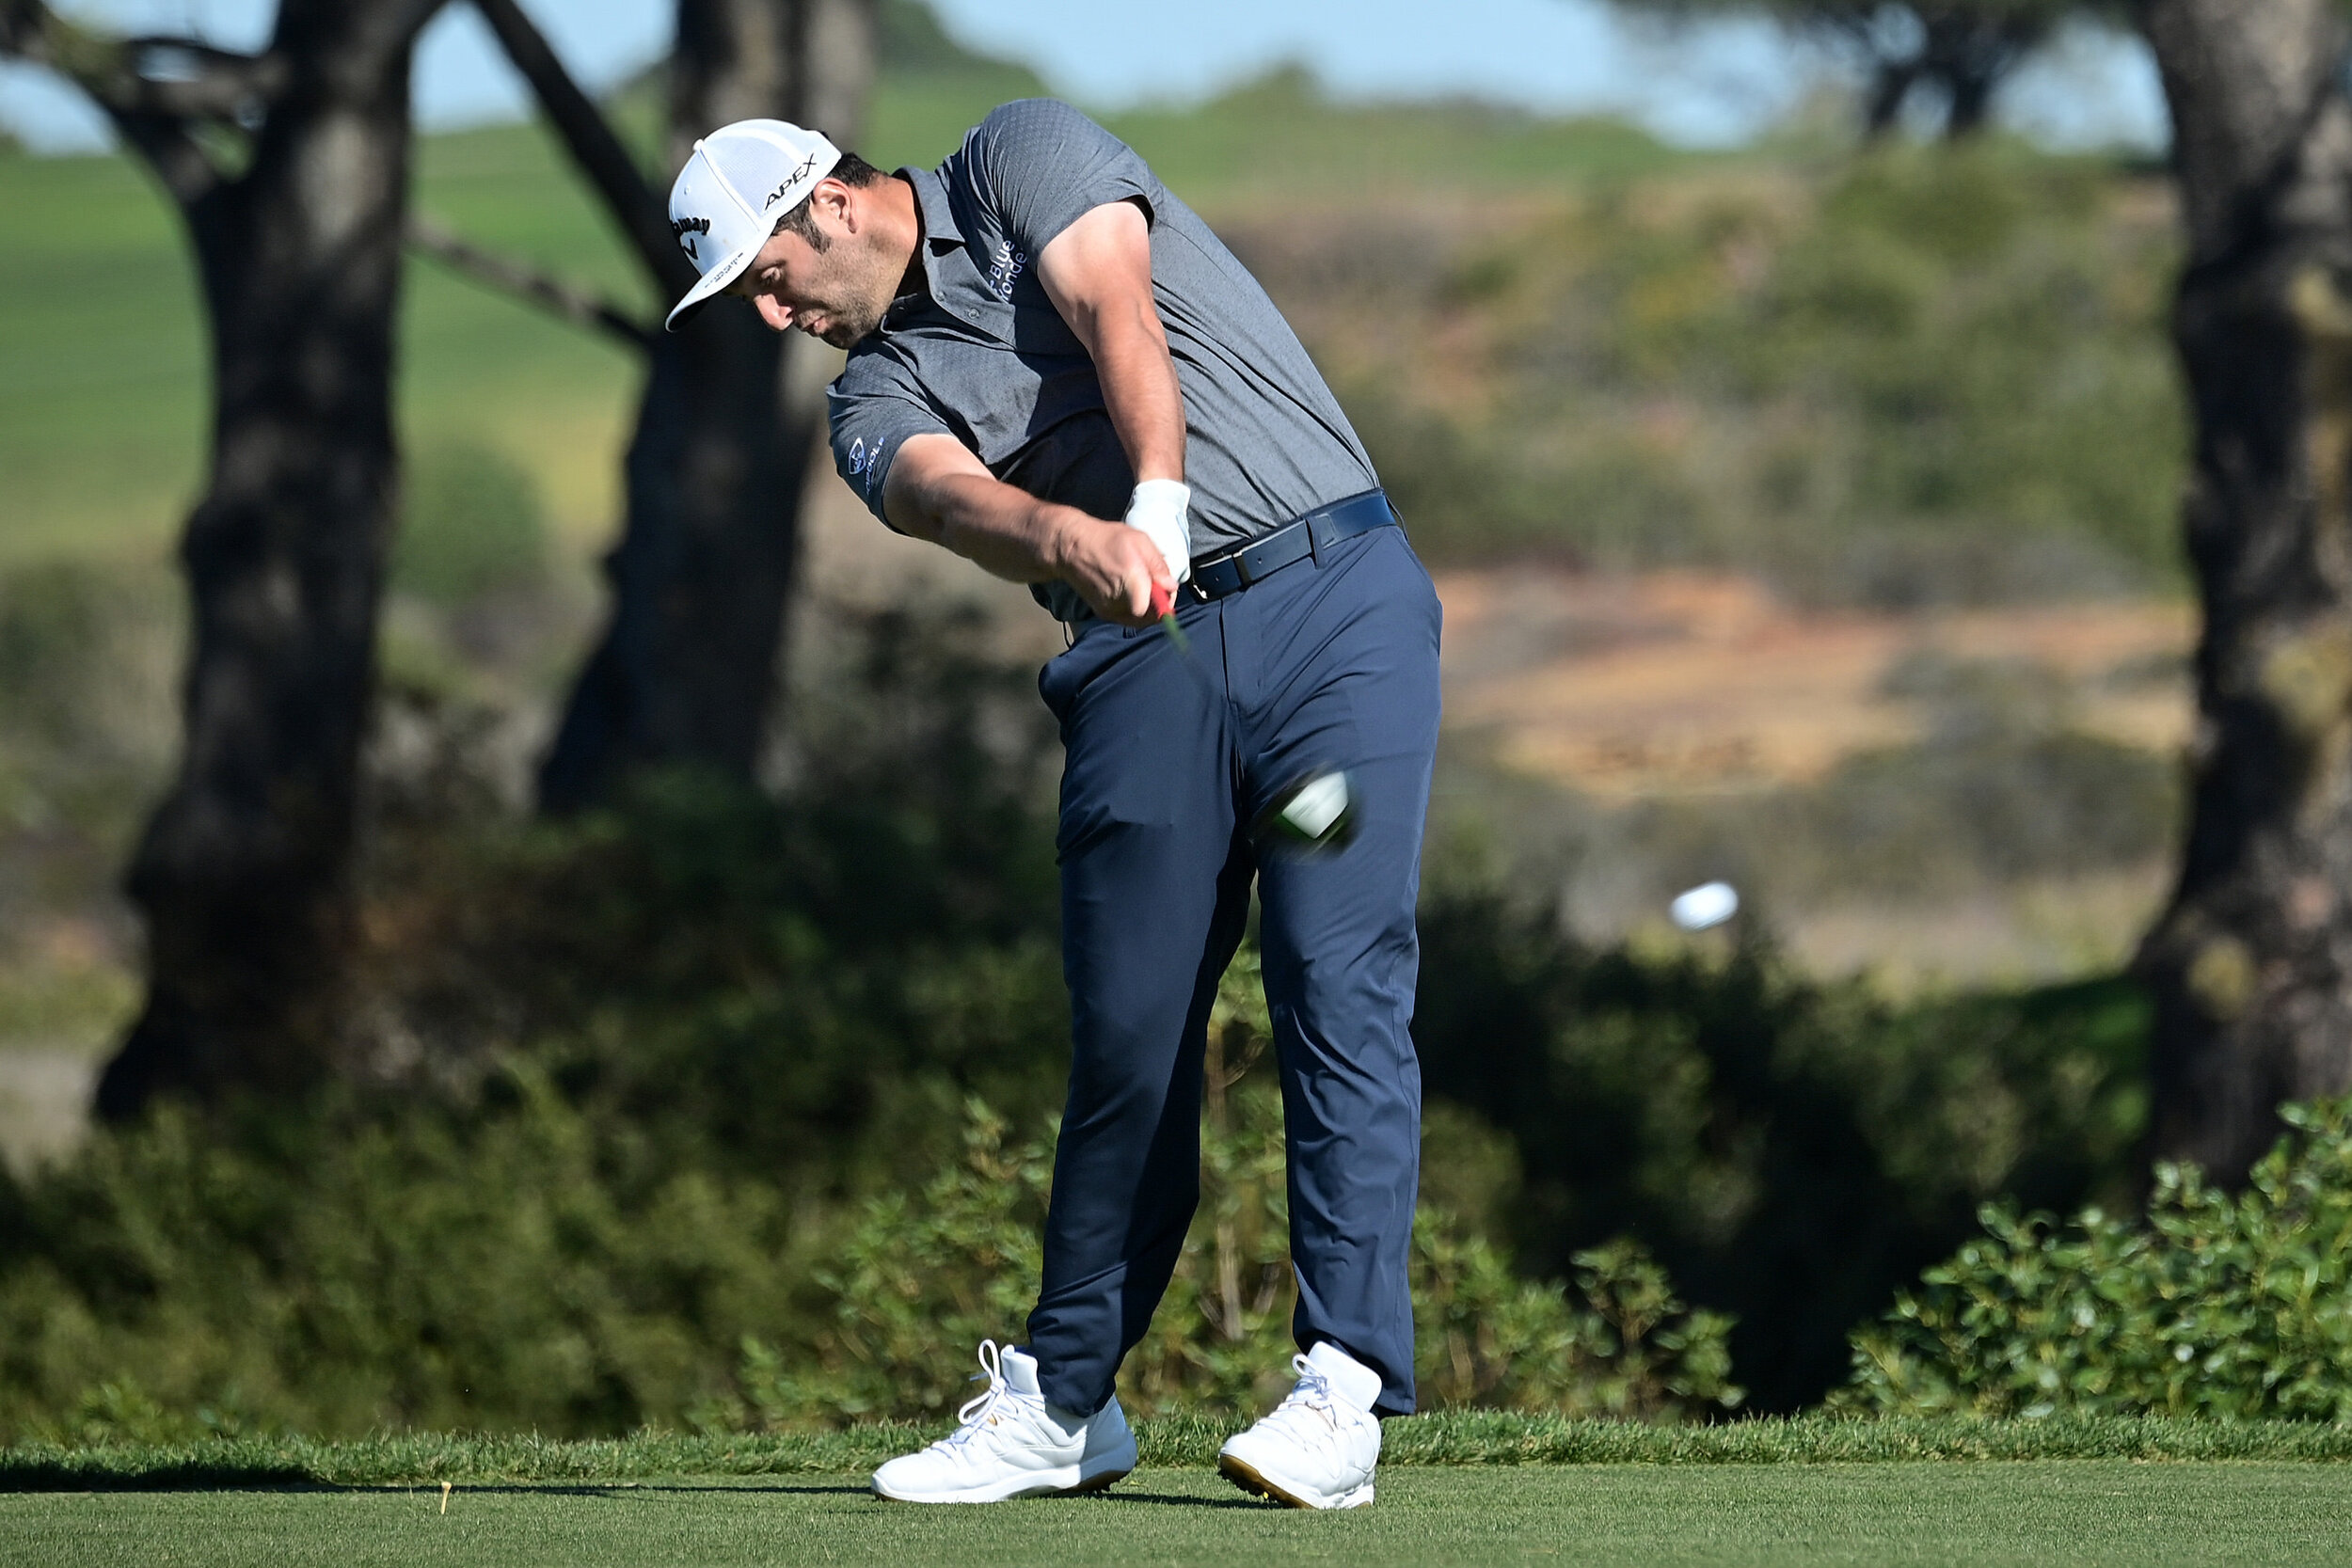  SAN DIEGO, CALIFORNIA - JANUARY 30: Jon Rahm hits his tee shot on the 5th hole during round three of the Farmers Insurance Open at Torrey Pines South on January 30, 2021 in San Diego, California. (Photo by Donald Miralle/Getty Images) 